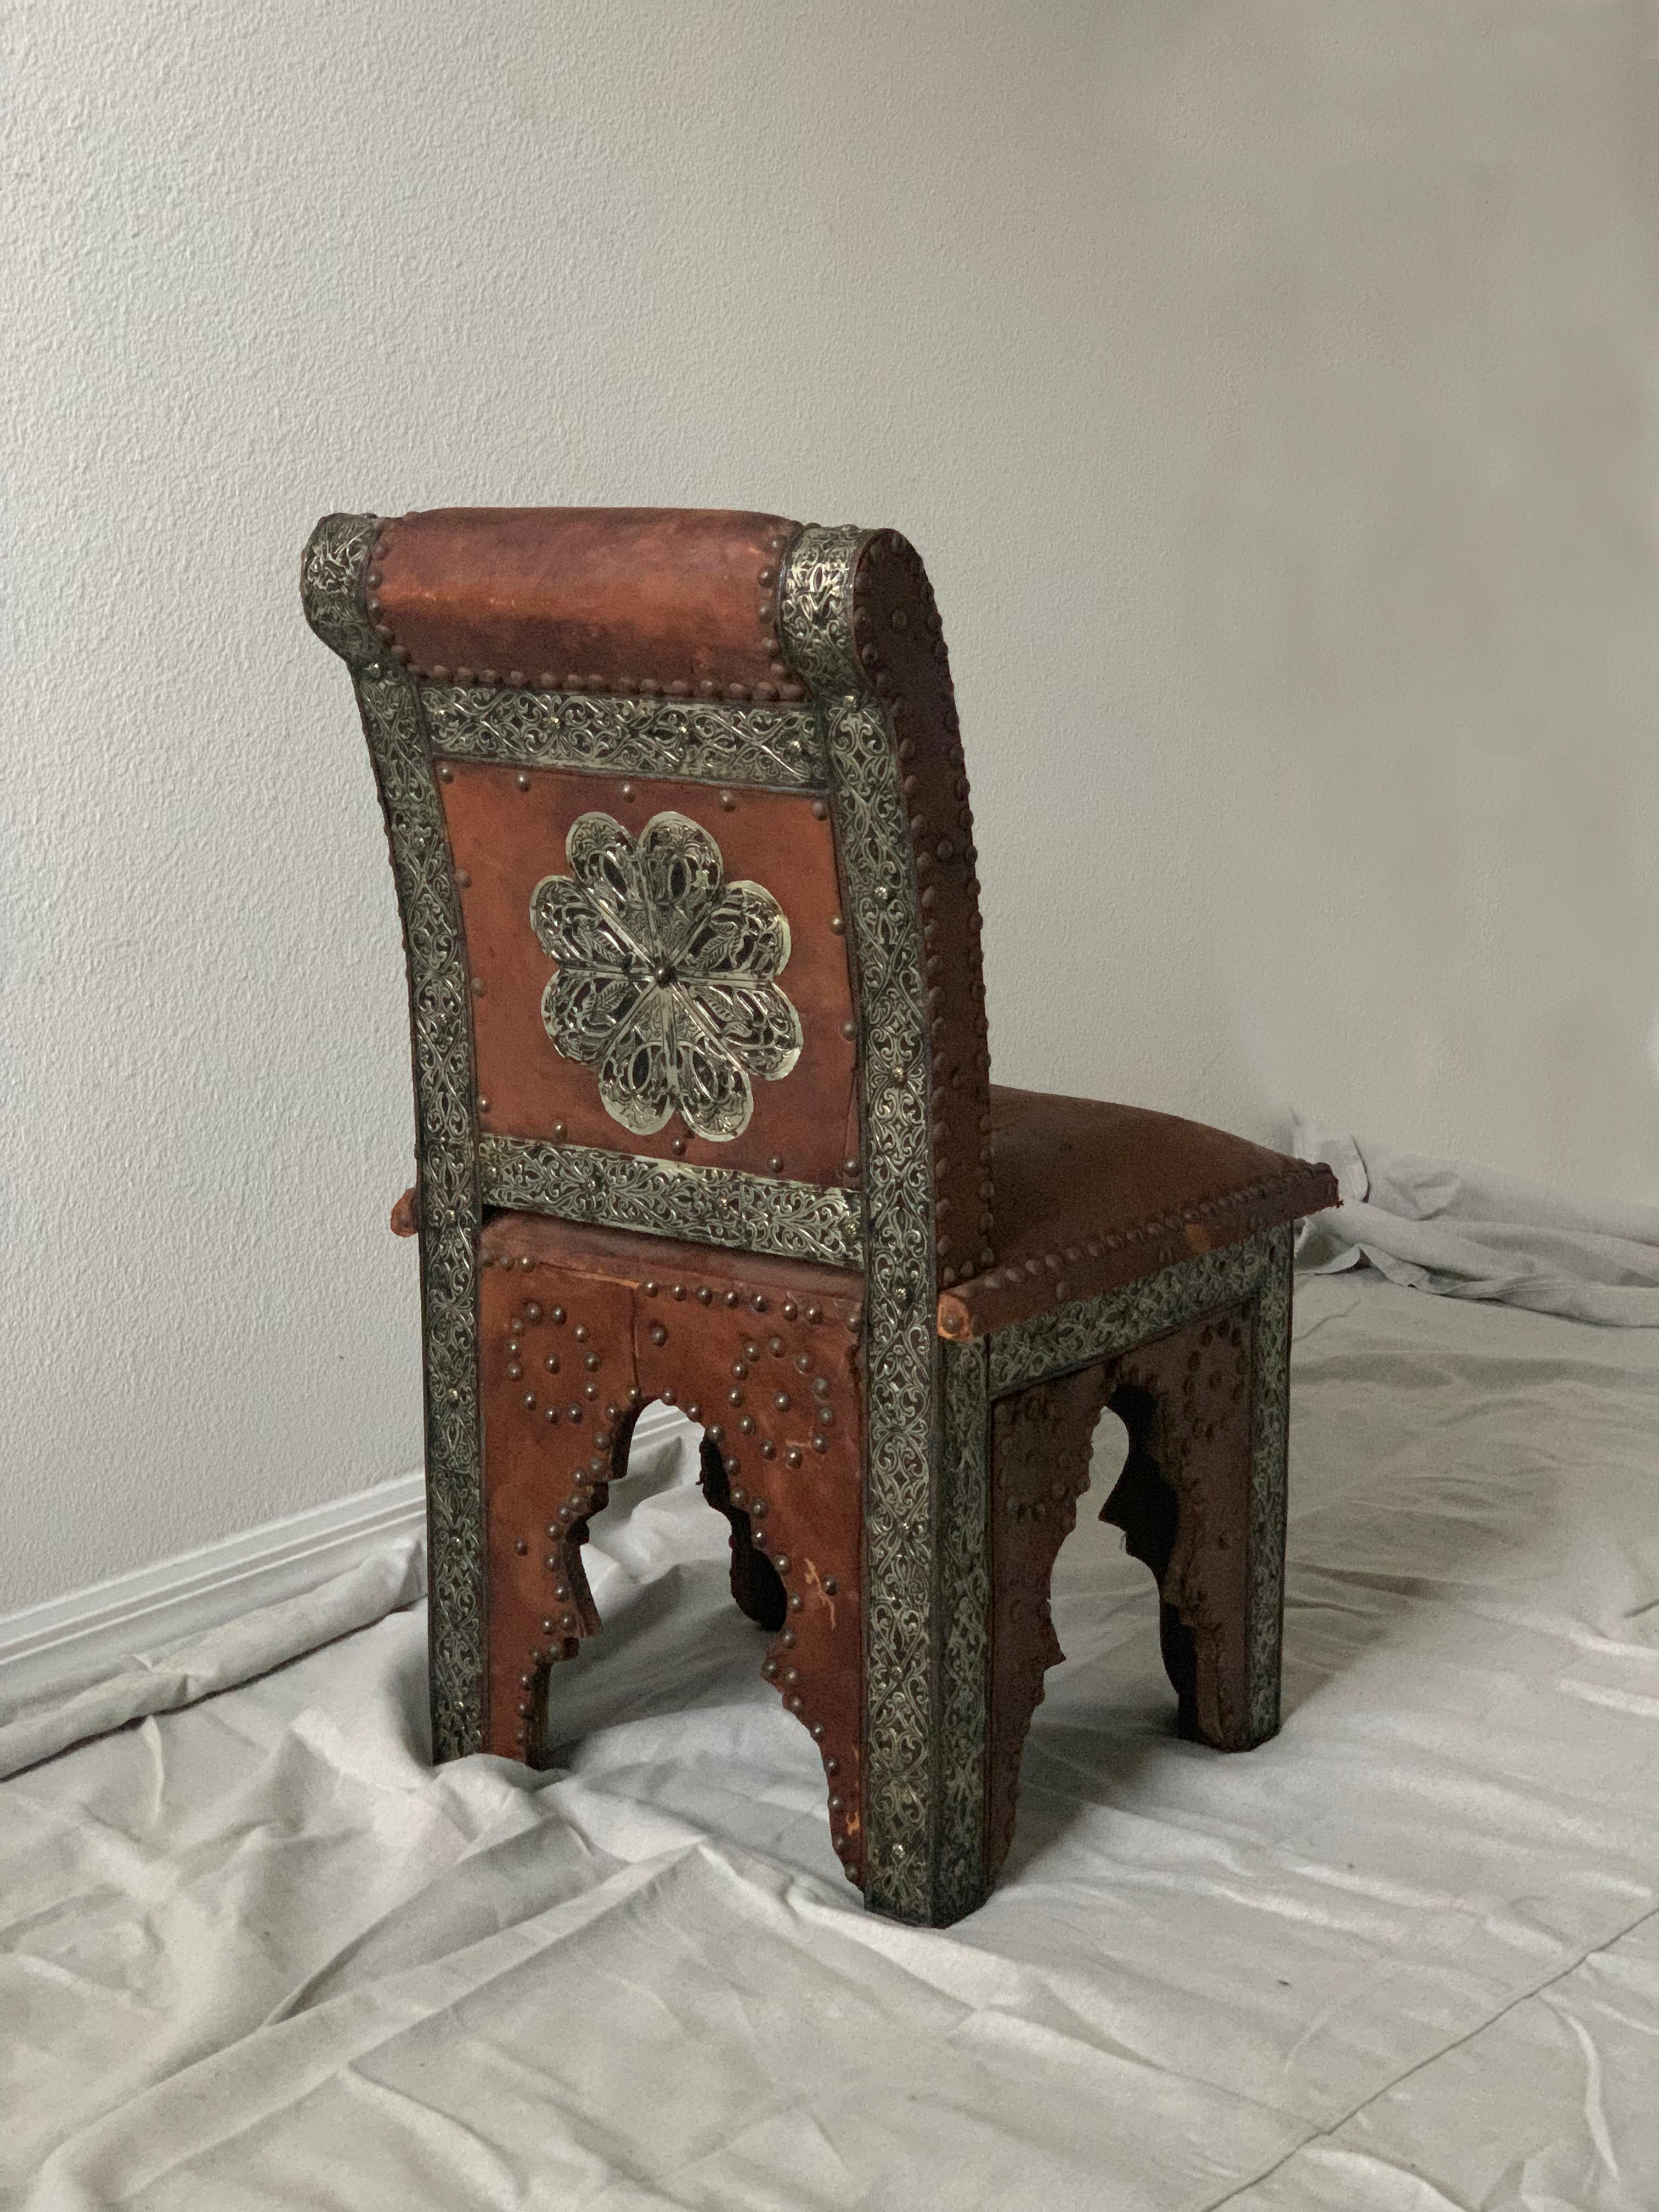 Upholstered in leather, chair displays intricate detailing - hand hammered metal, various studded detailing. Chair frame is wood and is raised on square inlaid legs with carved Arabic arches.